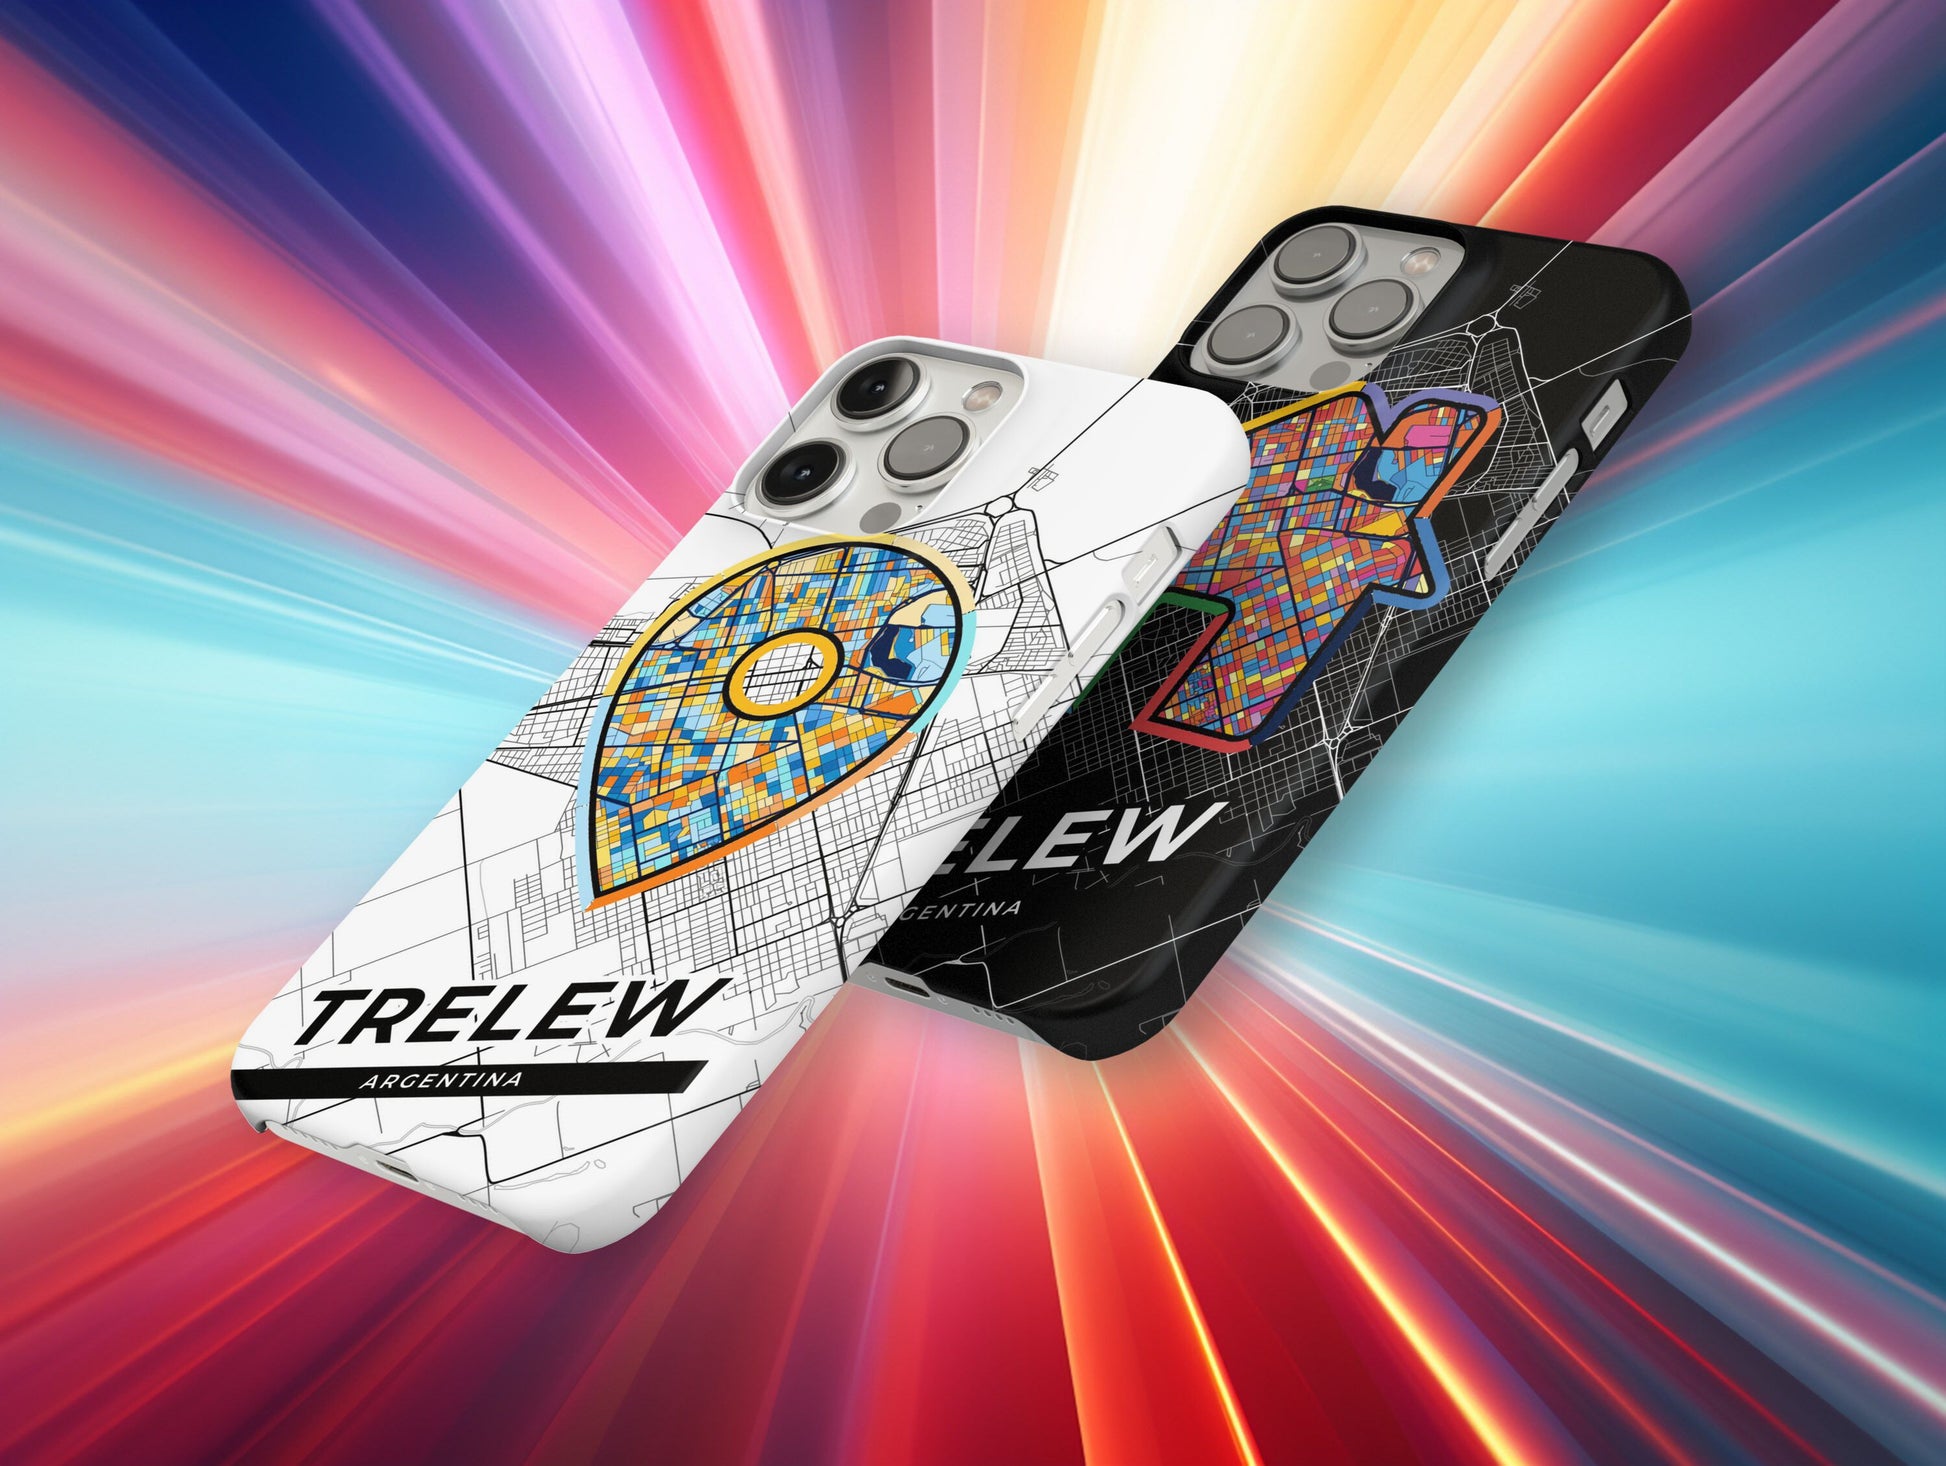 Trelew Argentina slim phone case with colorful icon. Birthday, wedding or housewarming gift. Couple match cases.